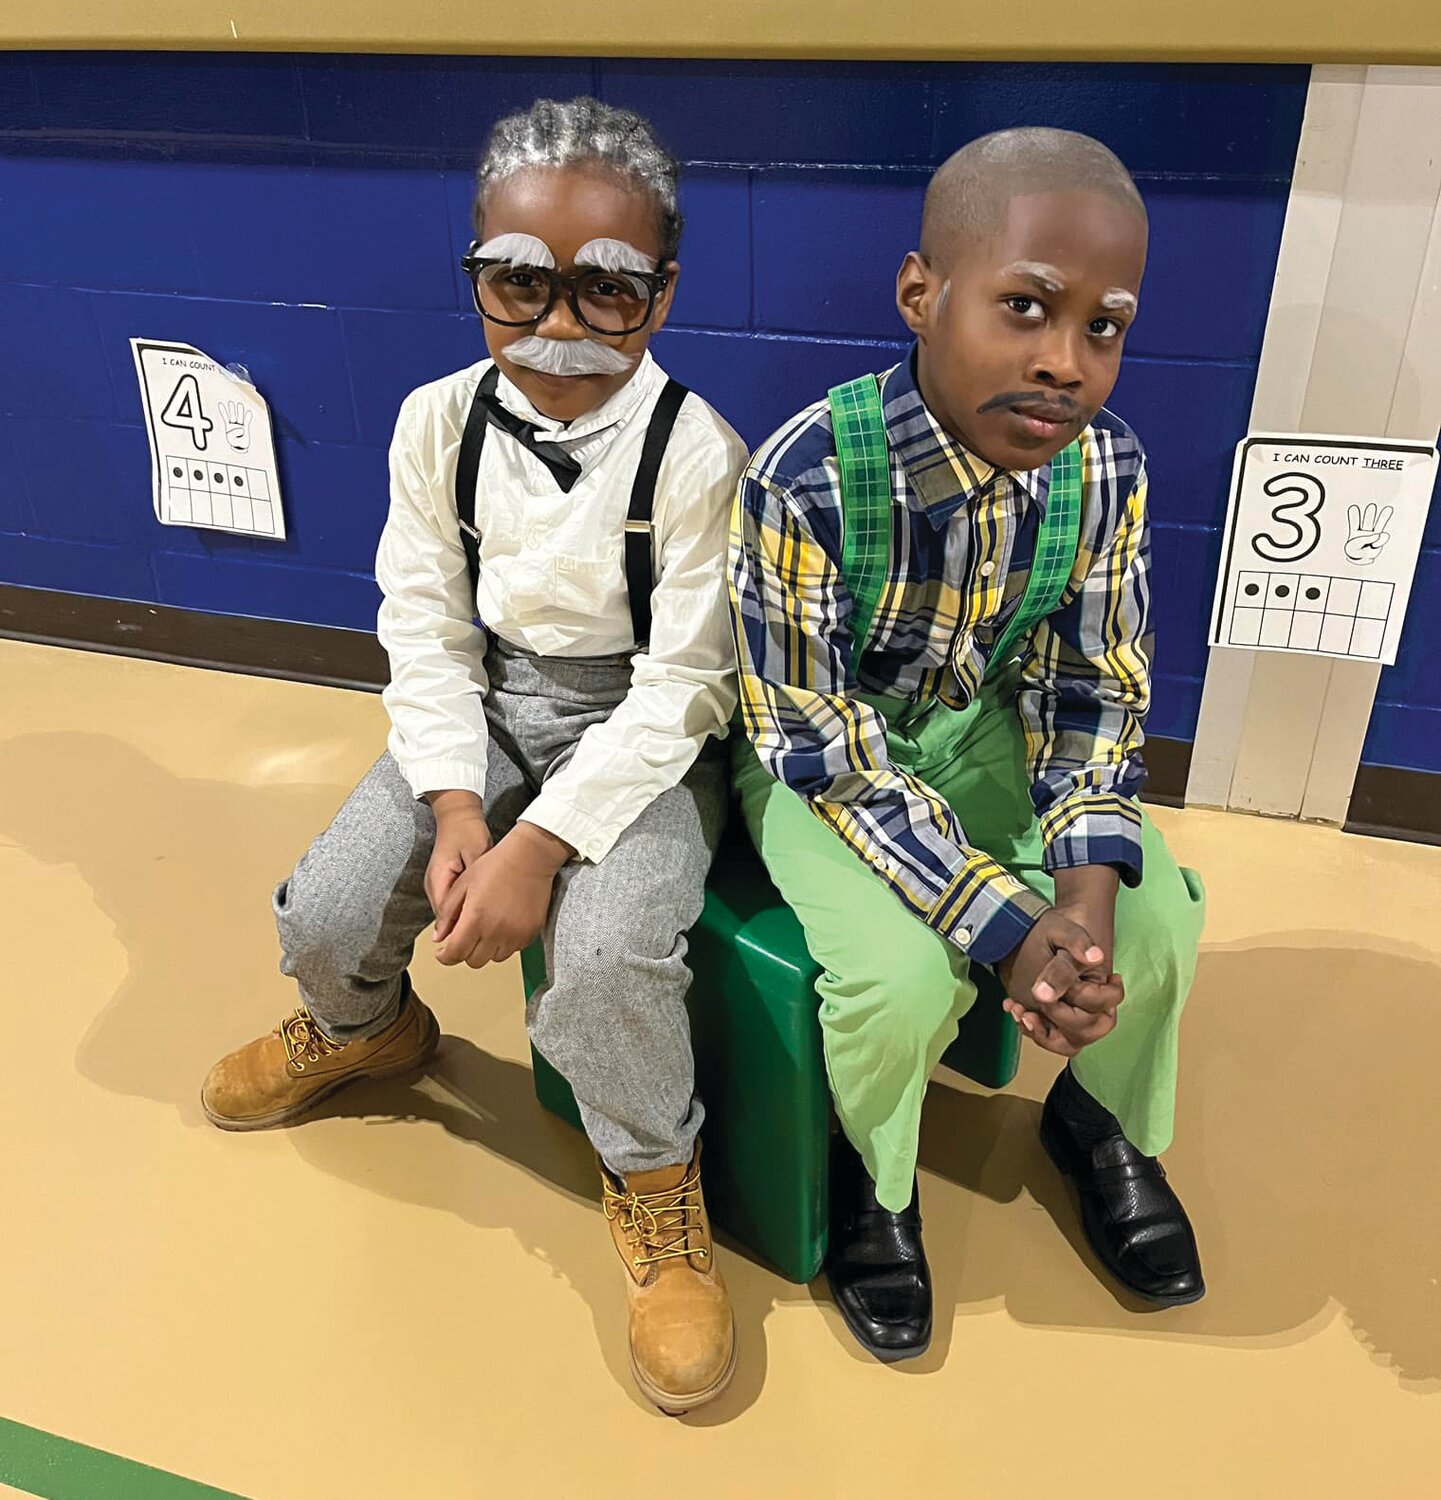 SALISBURY -- What would it be like to be 100? On Feb. 12, students at Chipman Elementary School had fun celebrating the 100th Day of the school year. (Photo courtesy Wicomico County Schools)